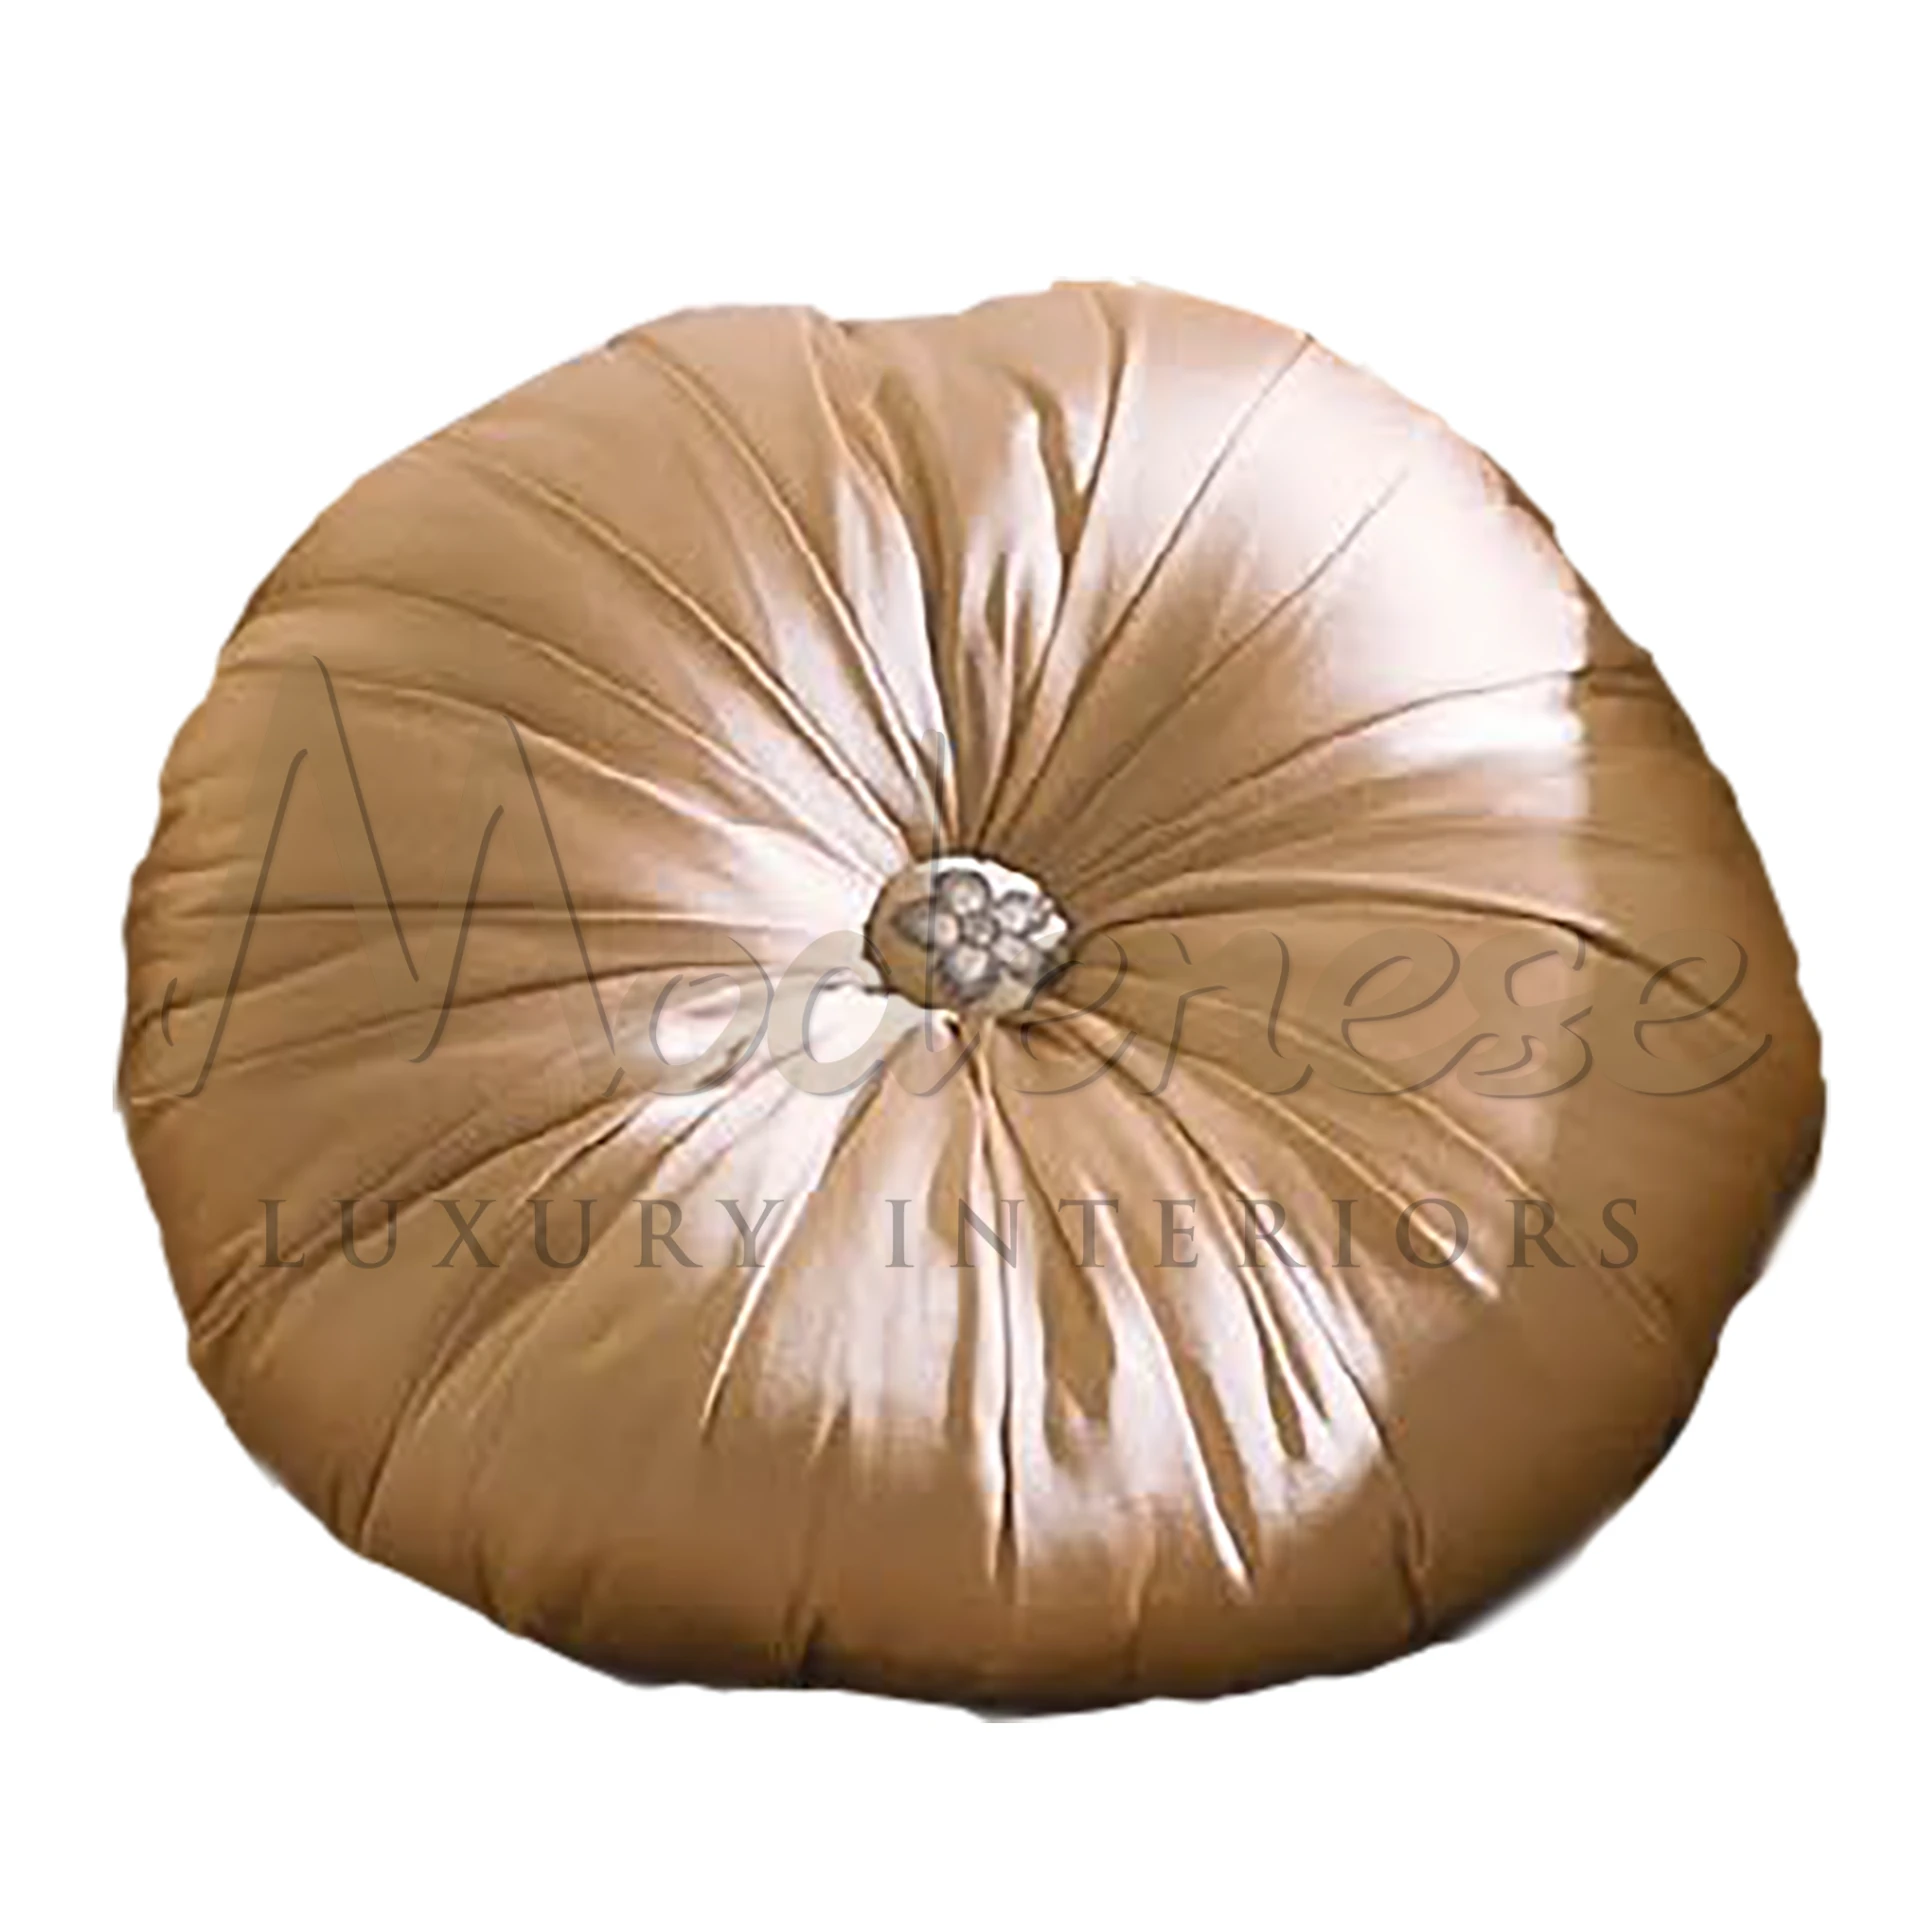 Classical Round Beige Pillow with clean lines and balanced design, embodying traditional Italian luxury and high-quality textiles.